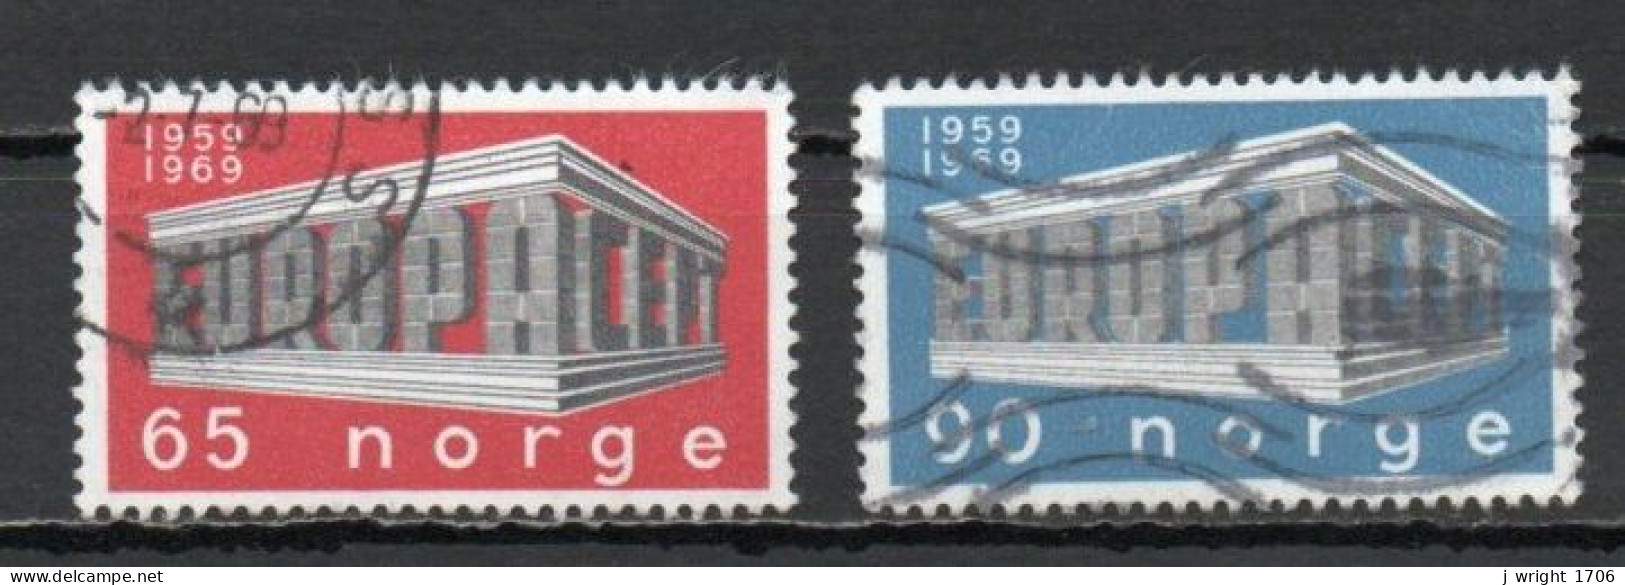 Norway, 1969, Europa CEPT, Set, USED - Used Stamps